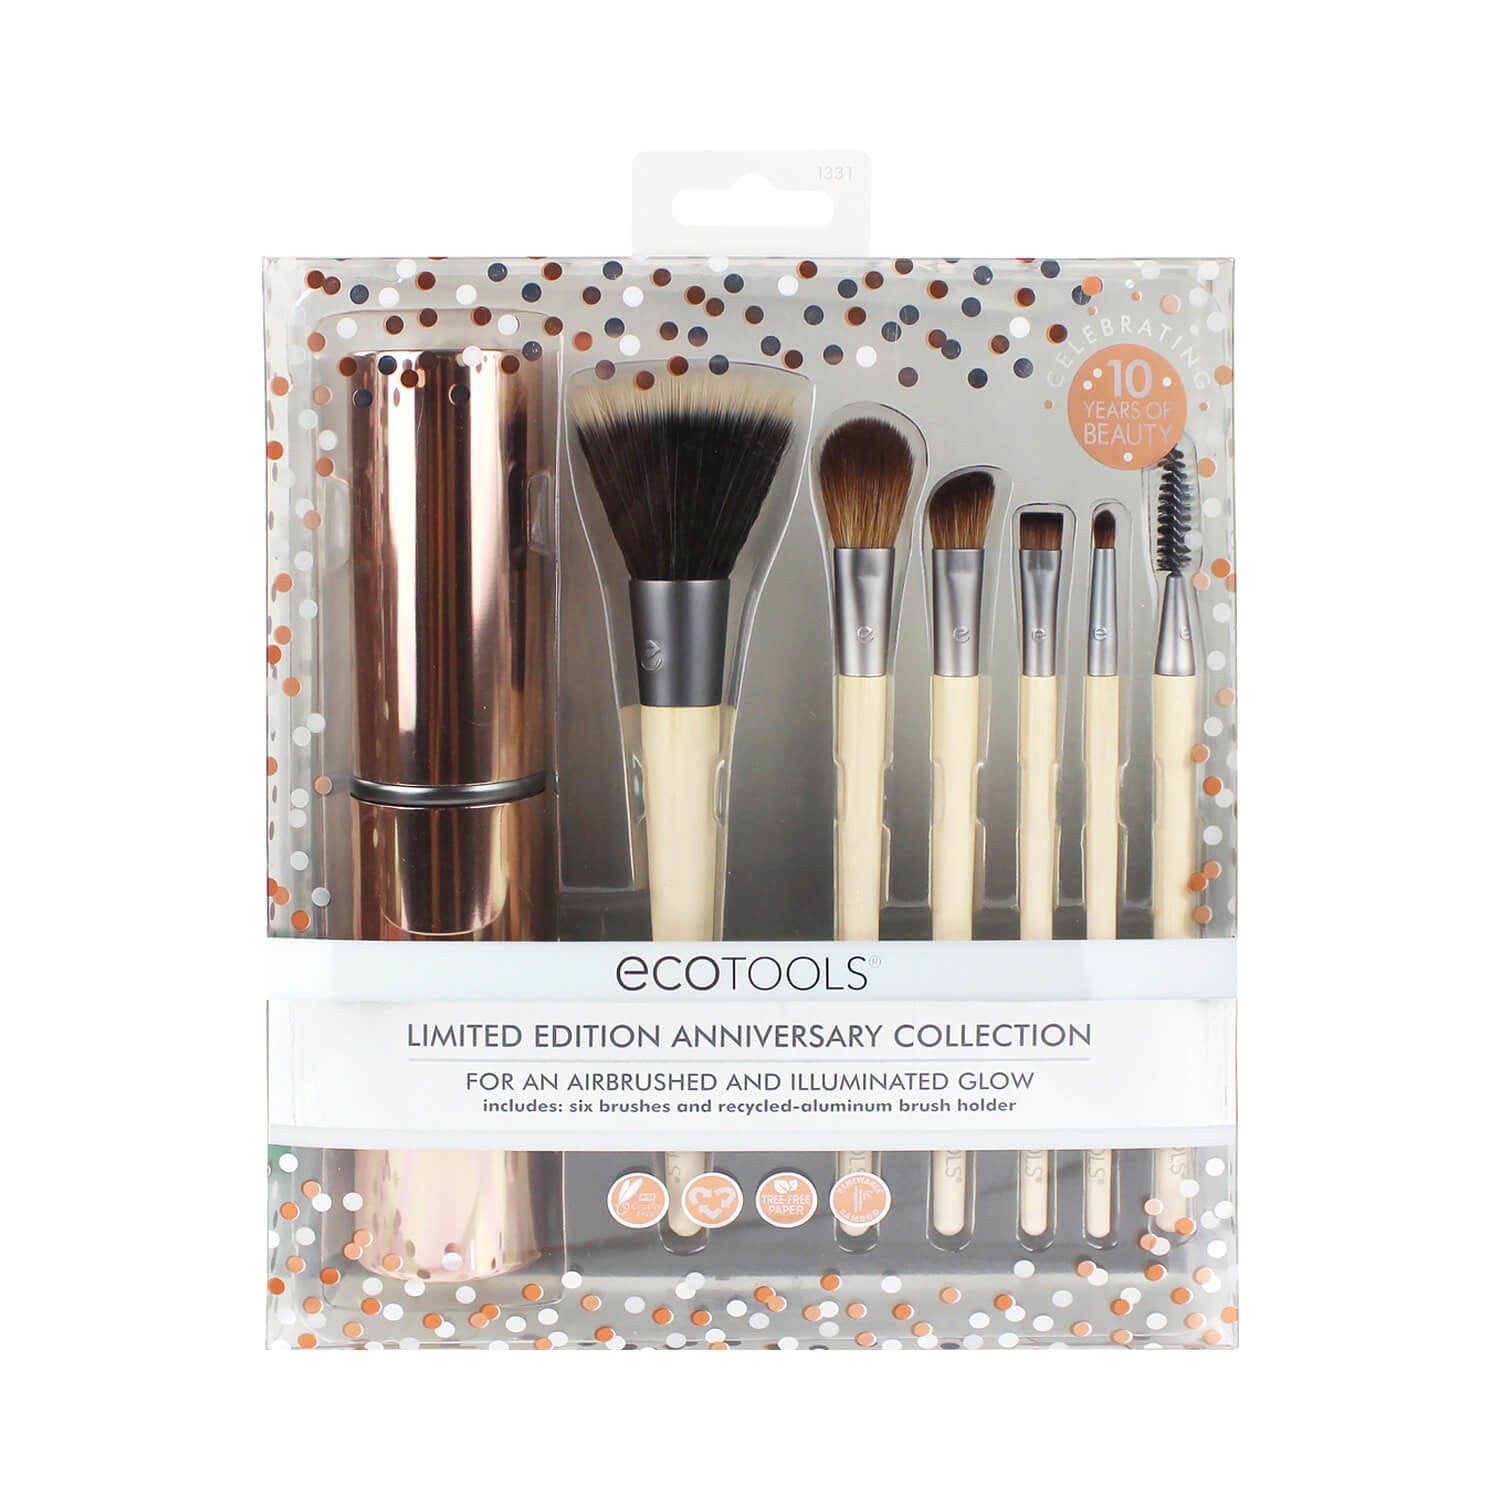 EcoTools Limited Edition Anniversary Collection Package